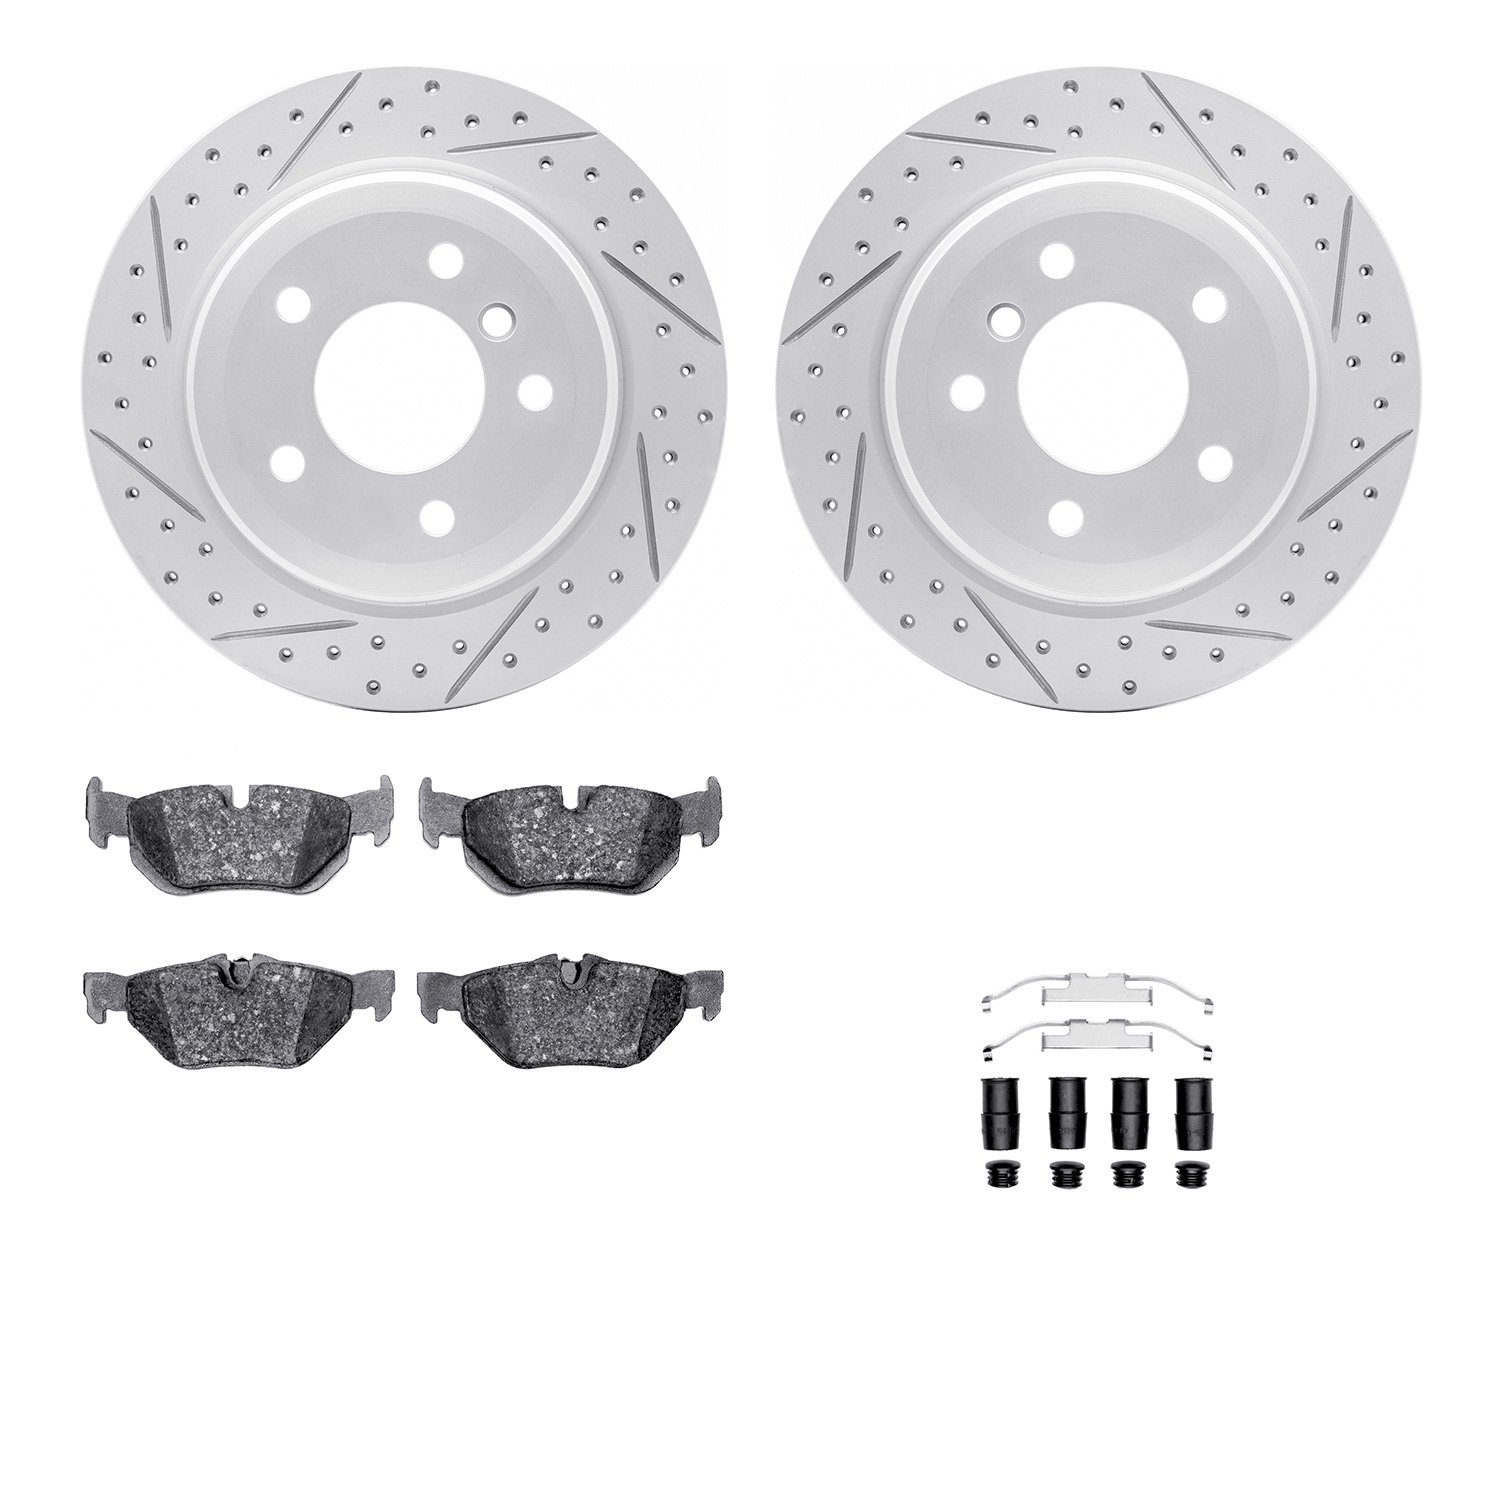 2512-31090 Geoperformance Drilled/Slotted Rotors w/5000 Advanced Brake Pads Kit & Hardware, 2006-2015 BMW, Position: Rear